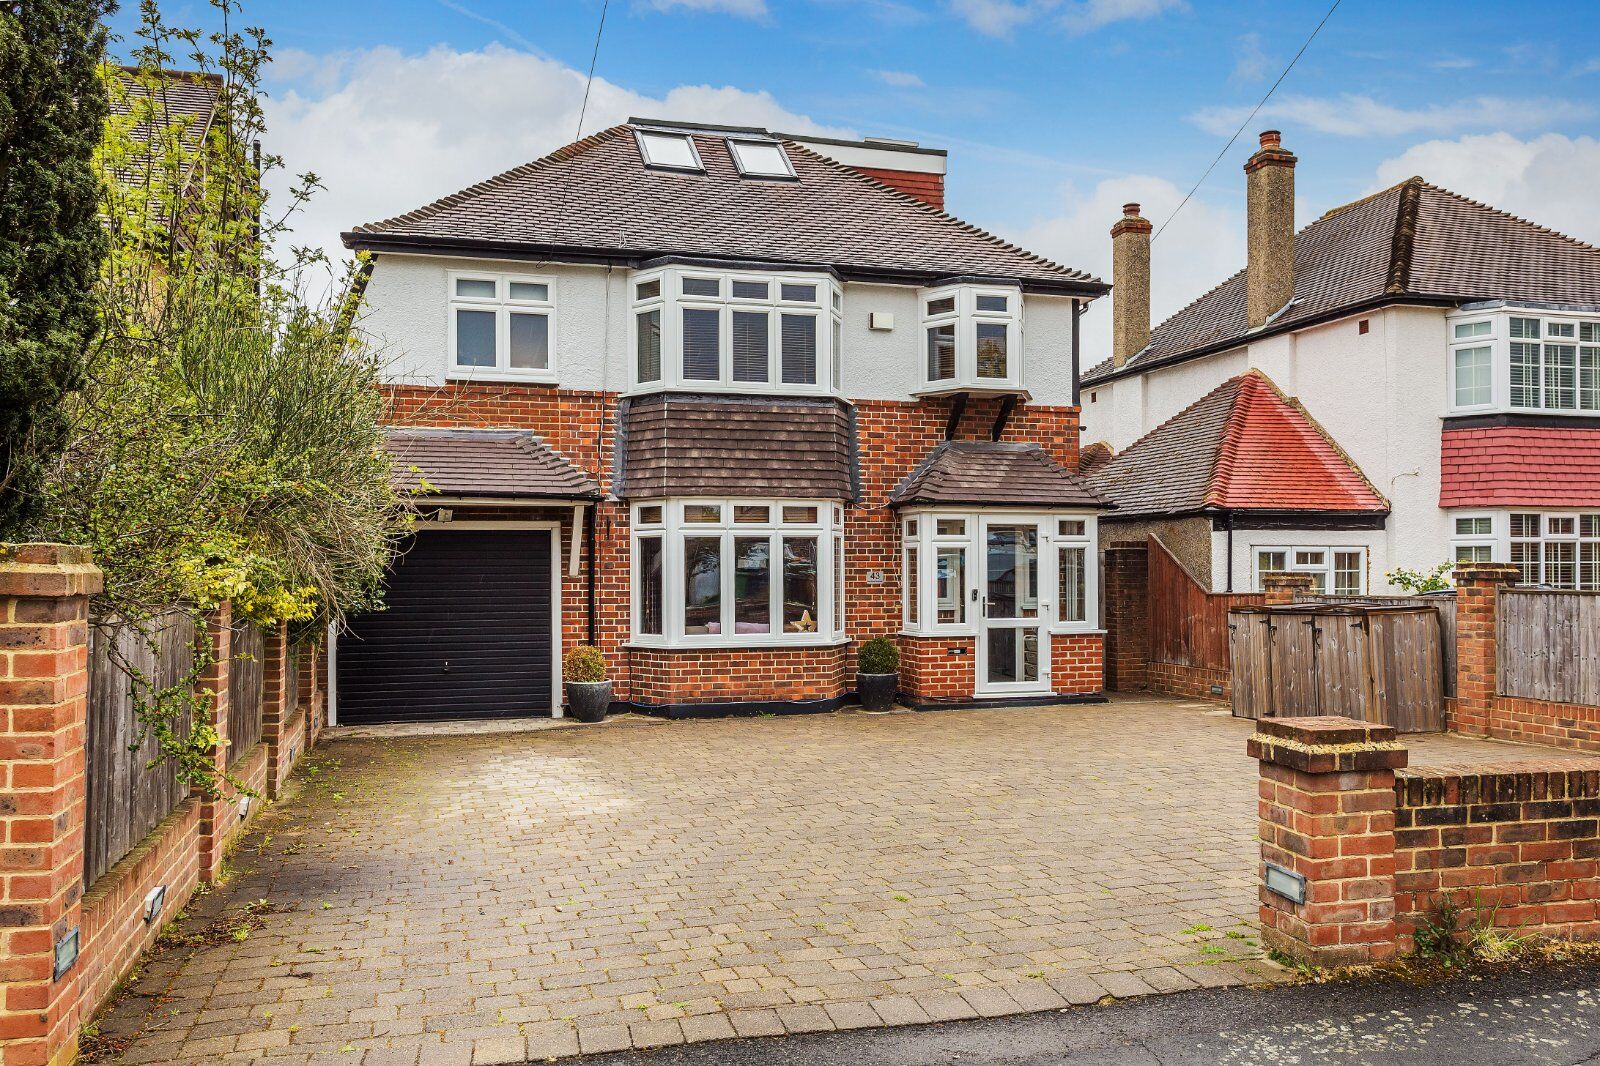 5 bedroom detached house for sale Northey Avenue, Cheam, SM2, main image